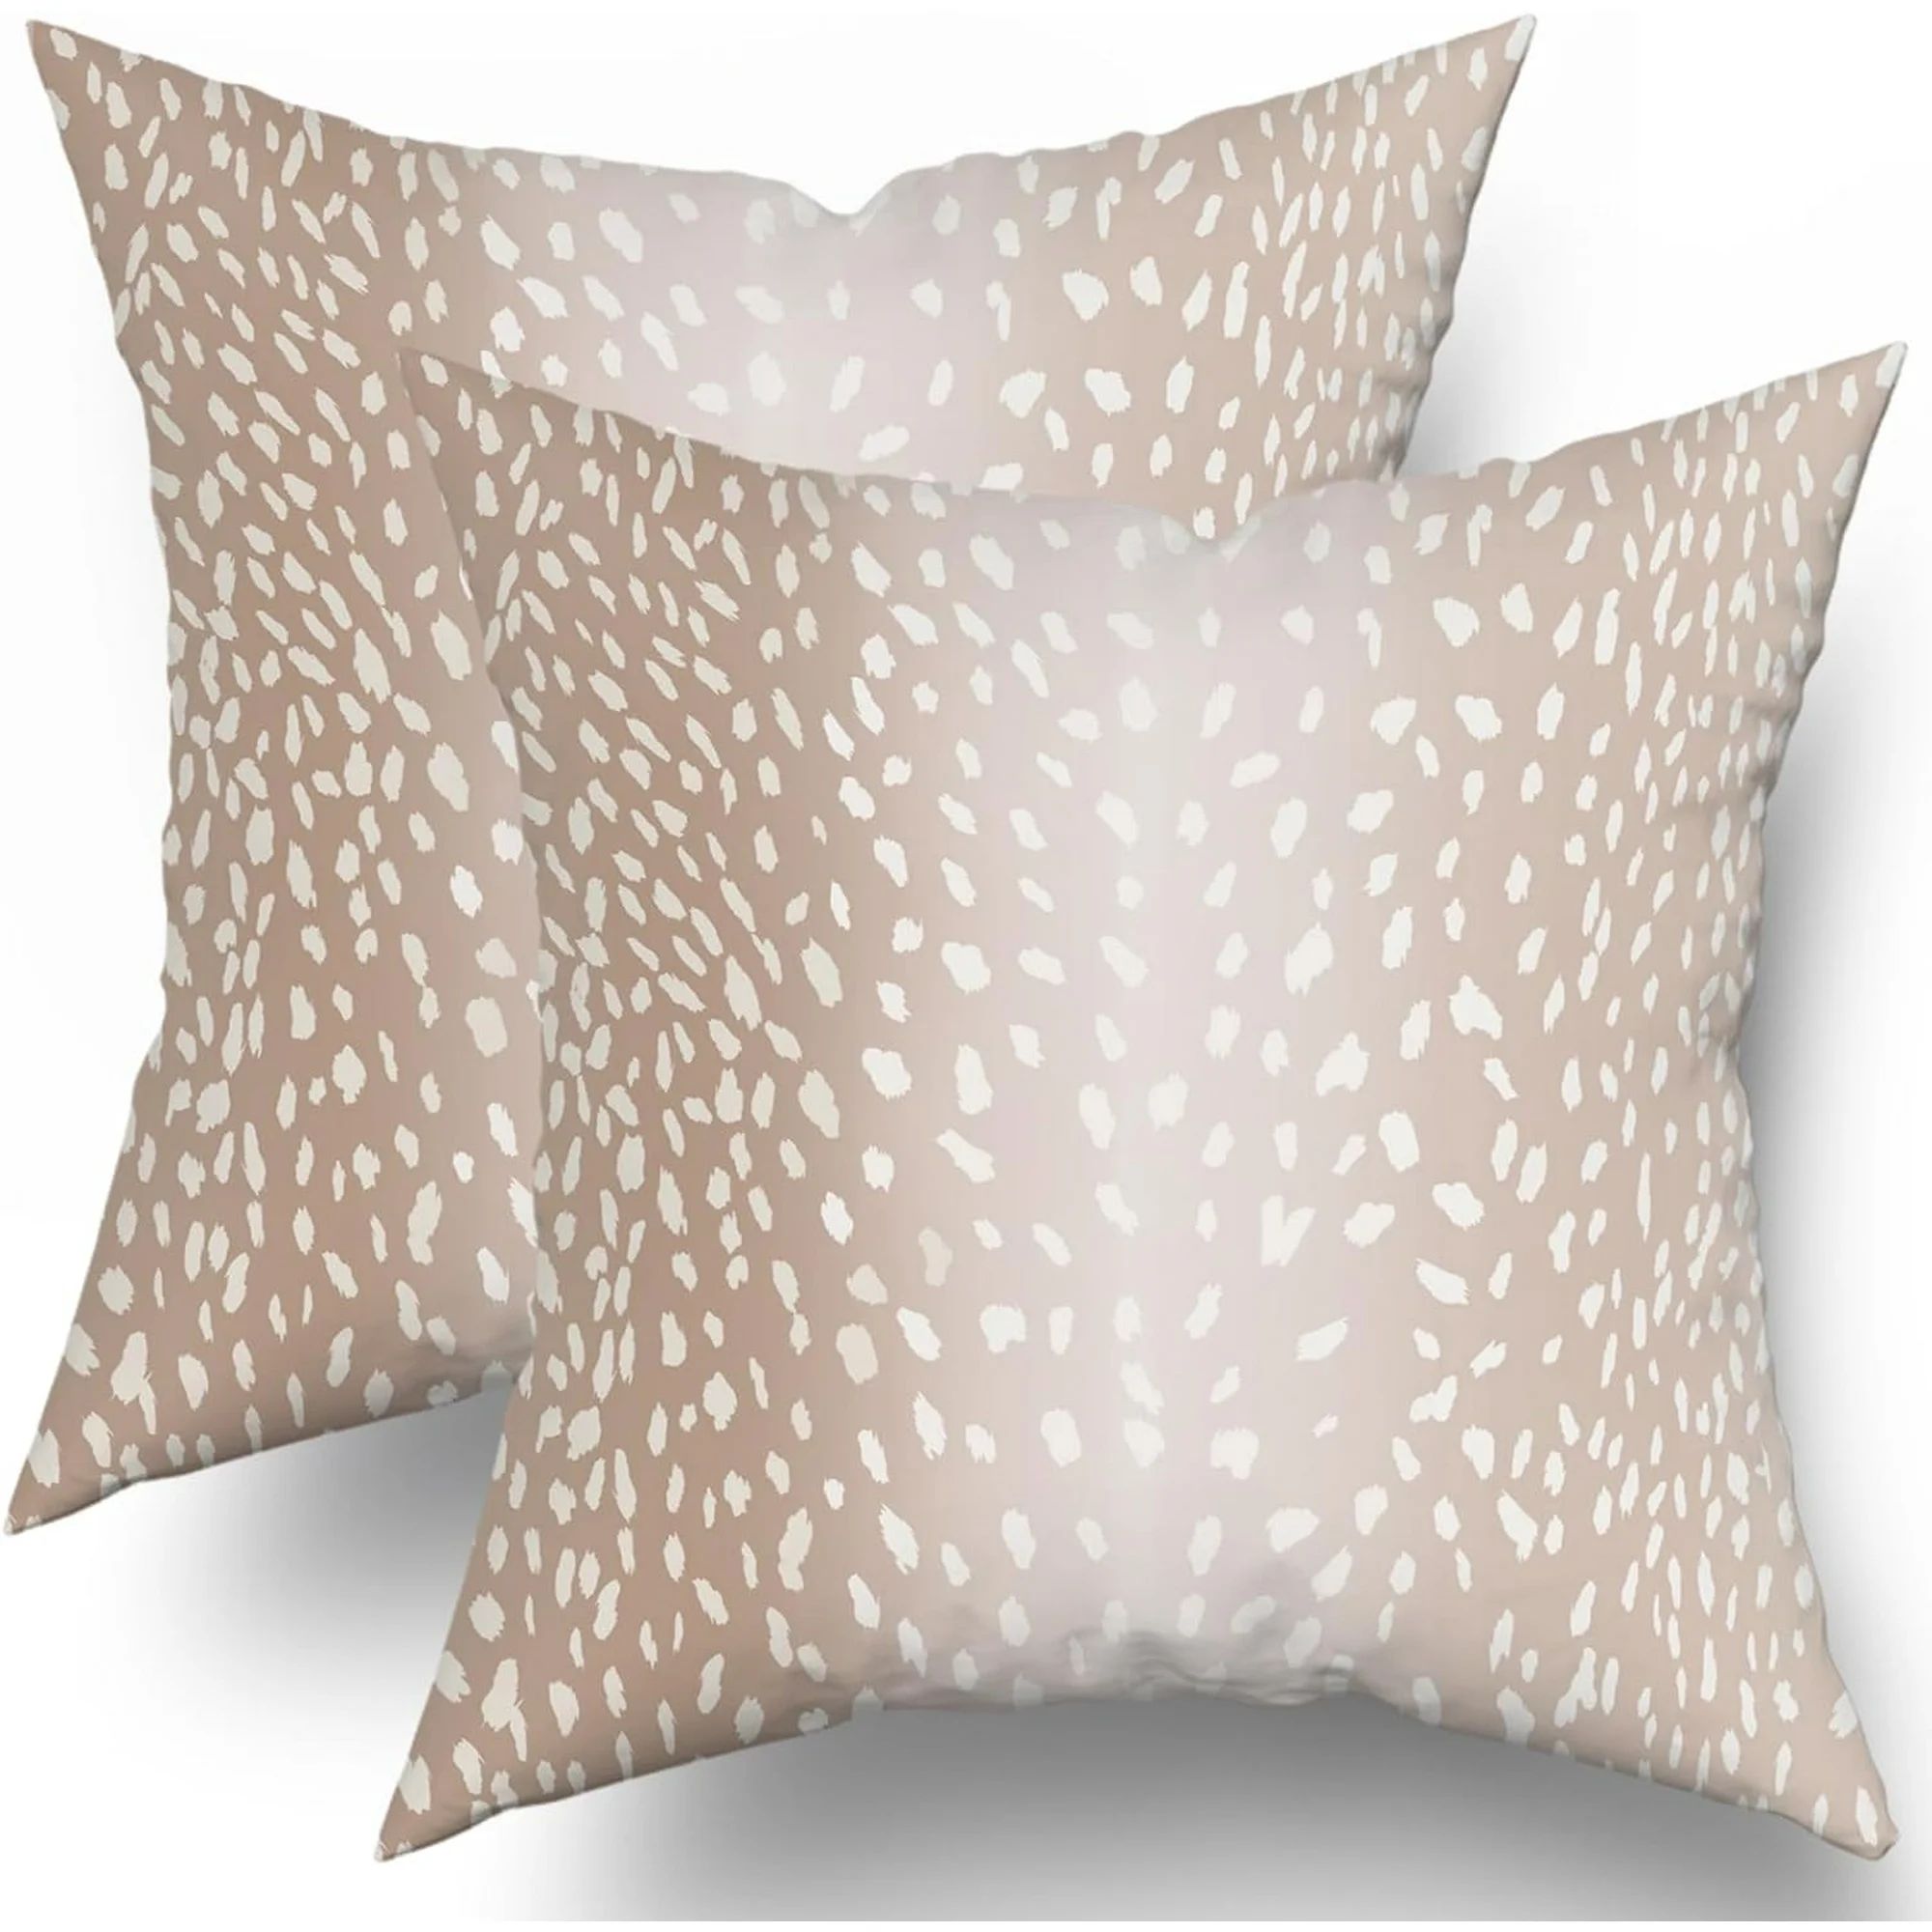 Antelope Pillow Covers 18x18 Inch Set of 2 Beige and White Faux Fawn Animal Print Decorative Thro... | Walmart (US)